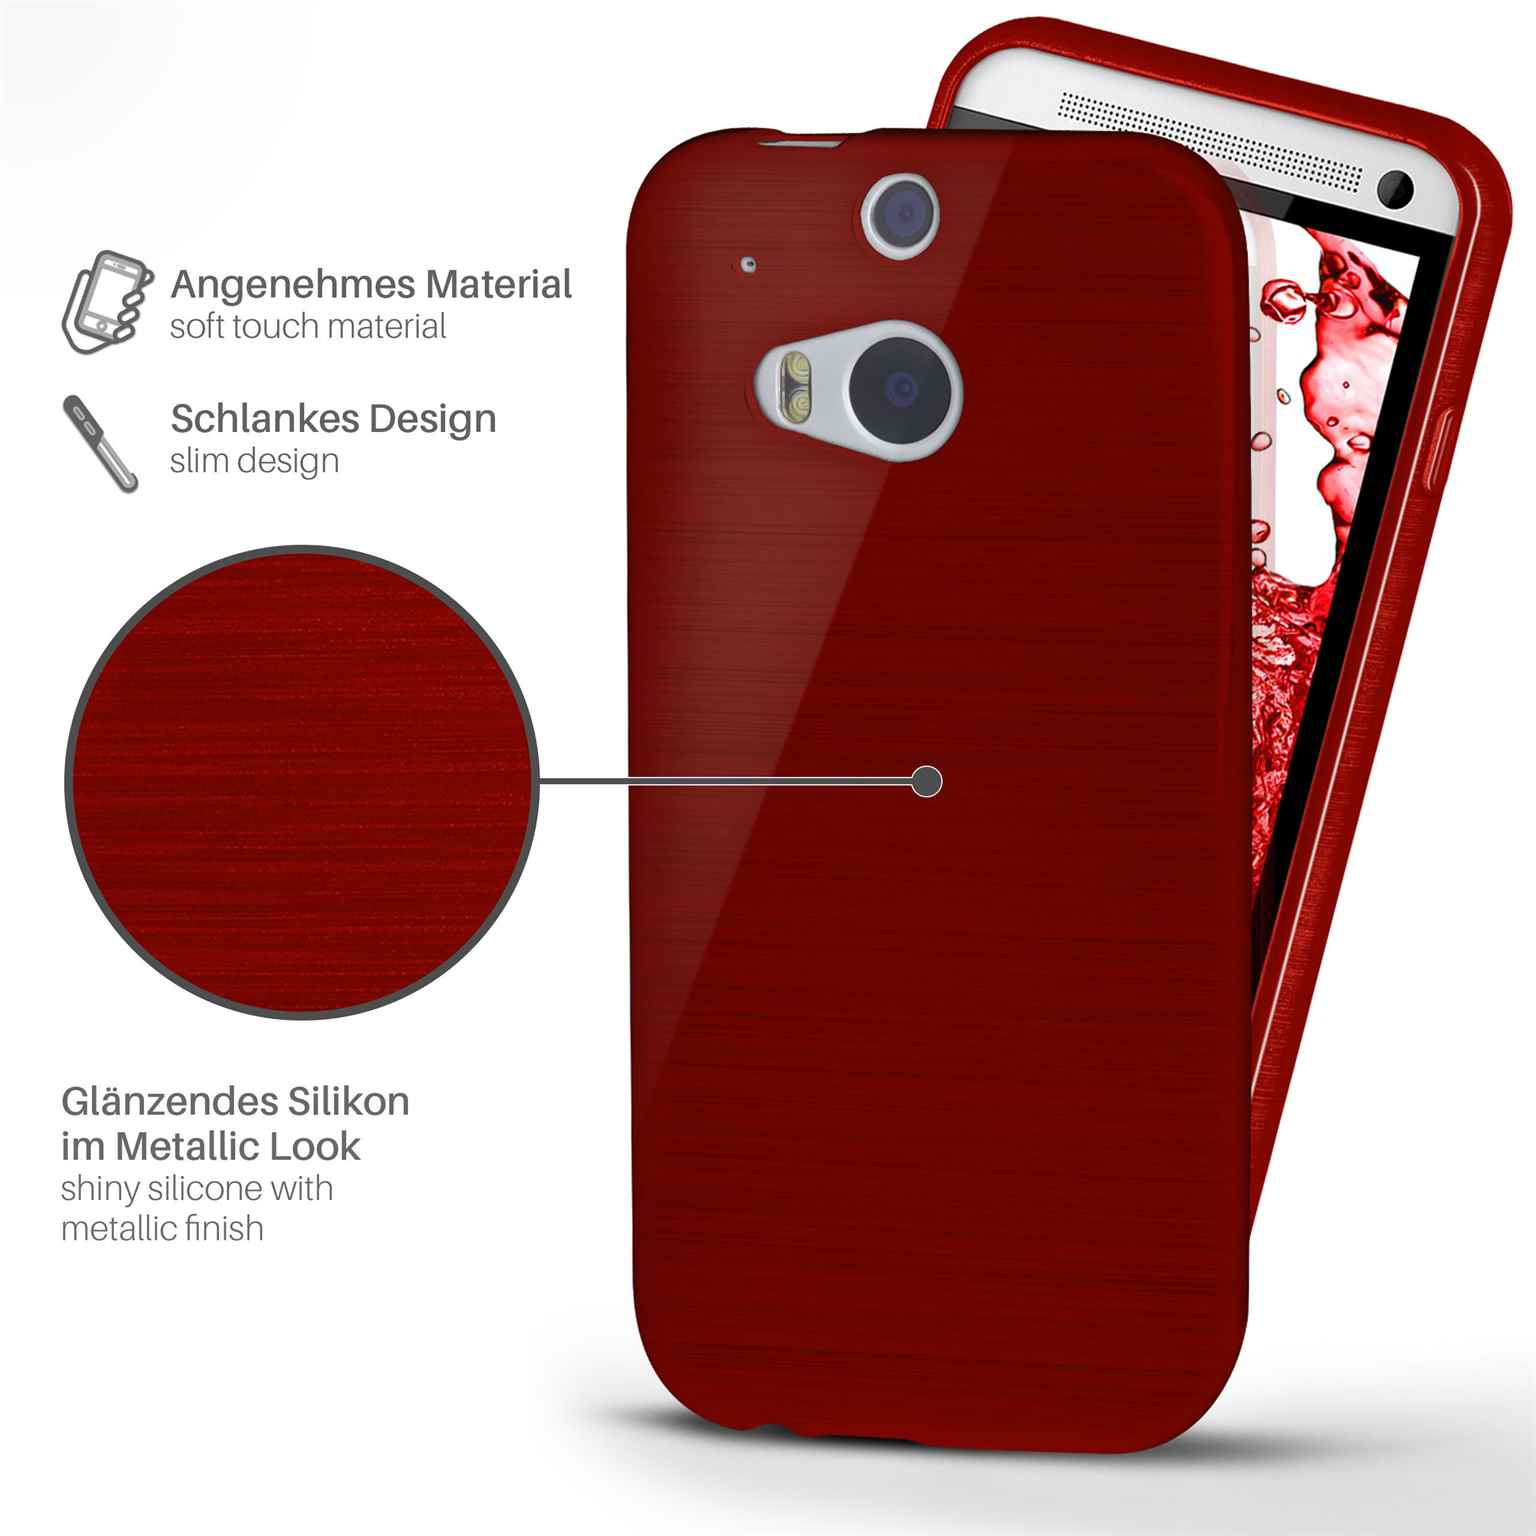 MOEX Brushed Case, Backcover, HTC, Crimson-Red M8s, One